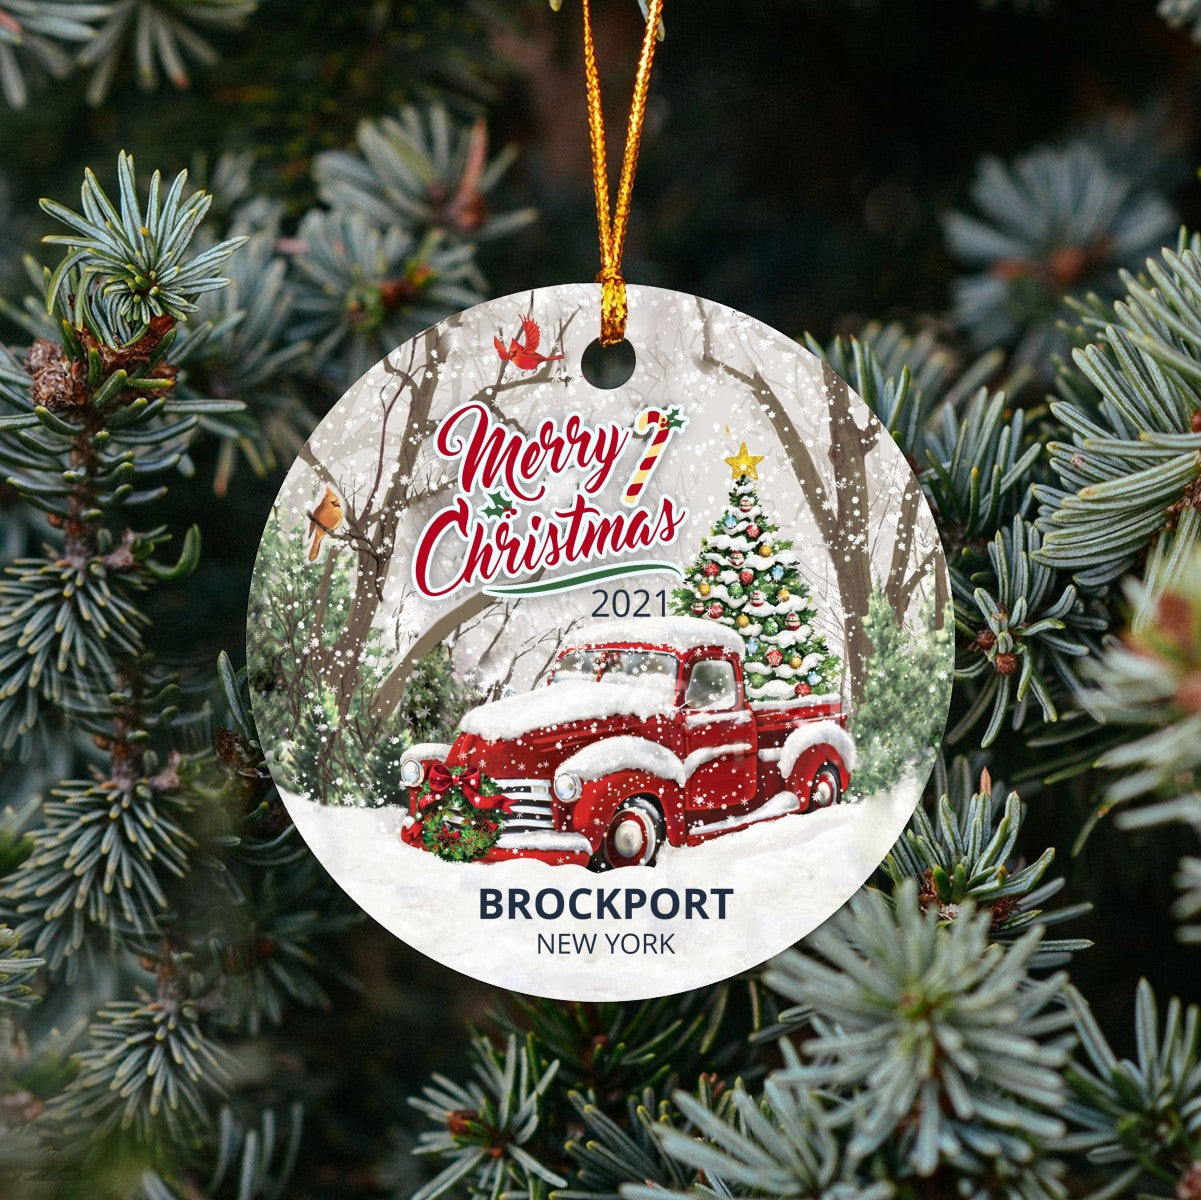 Christmas Tree Ornaments Brockport - Ornament With Name City, State Brockport New York NY Ornament - Red Truck Xmas Ornaments 3'' Plastic Gift For Family, Friend And Housewarming